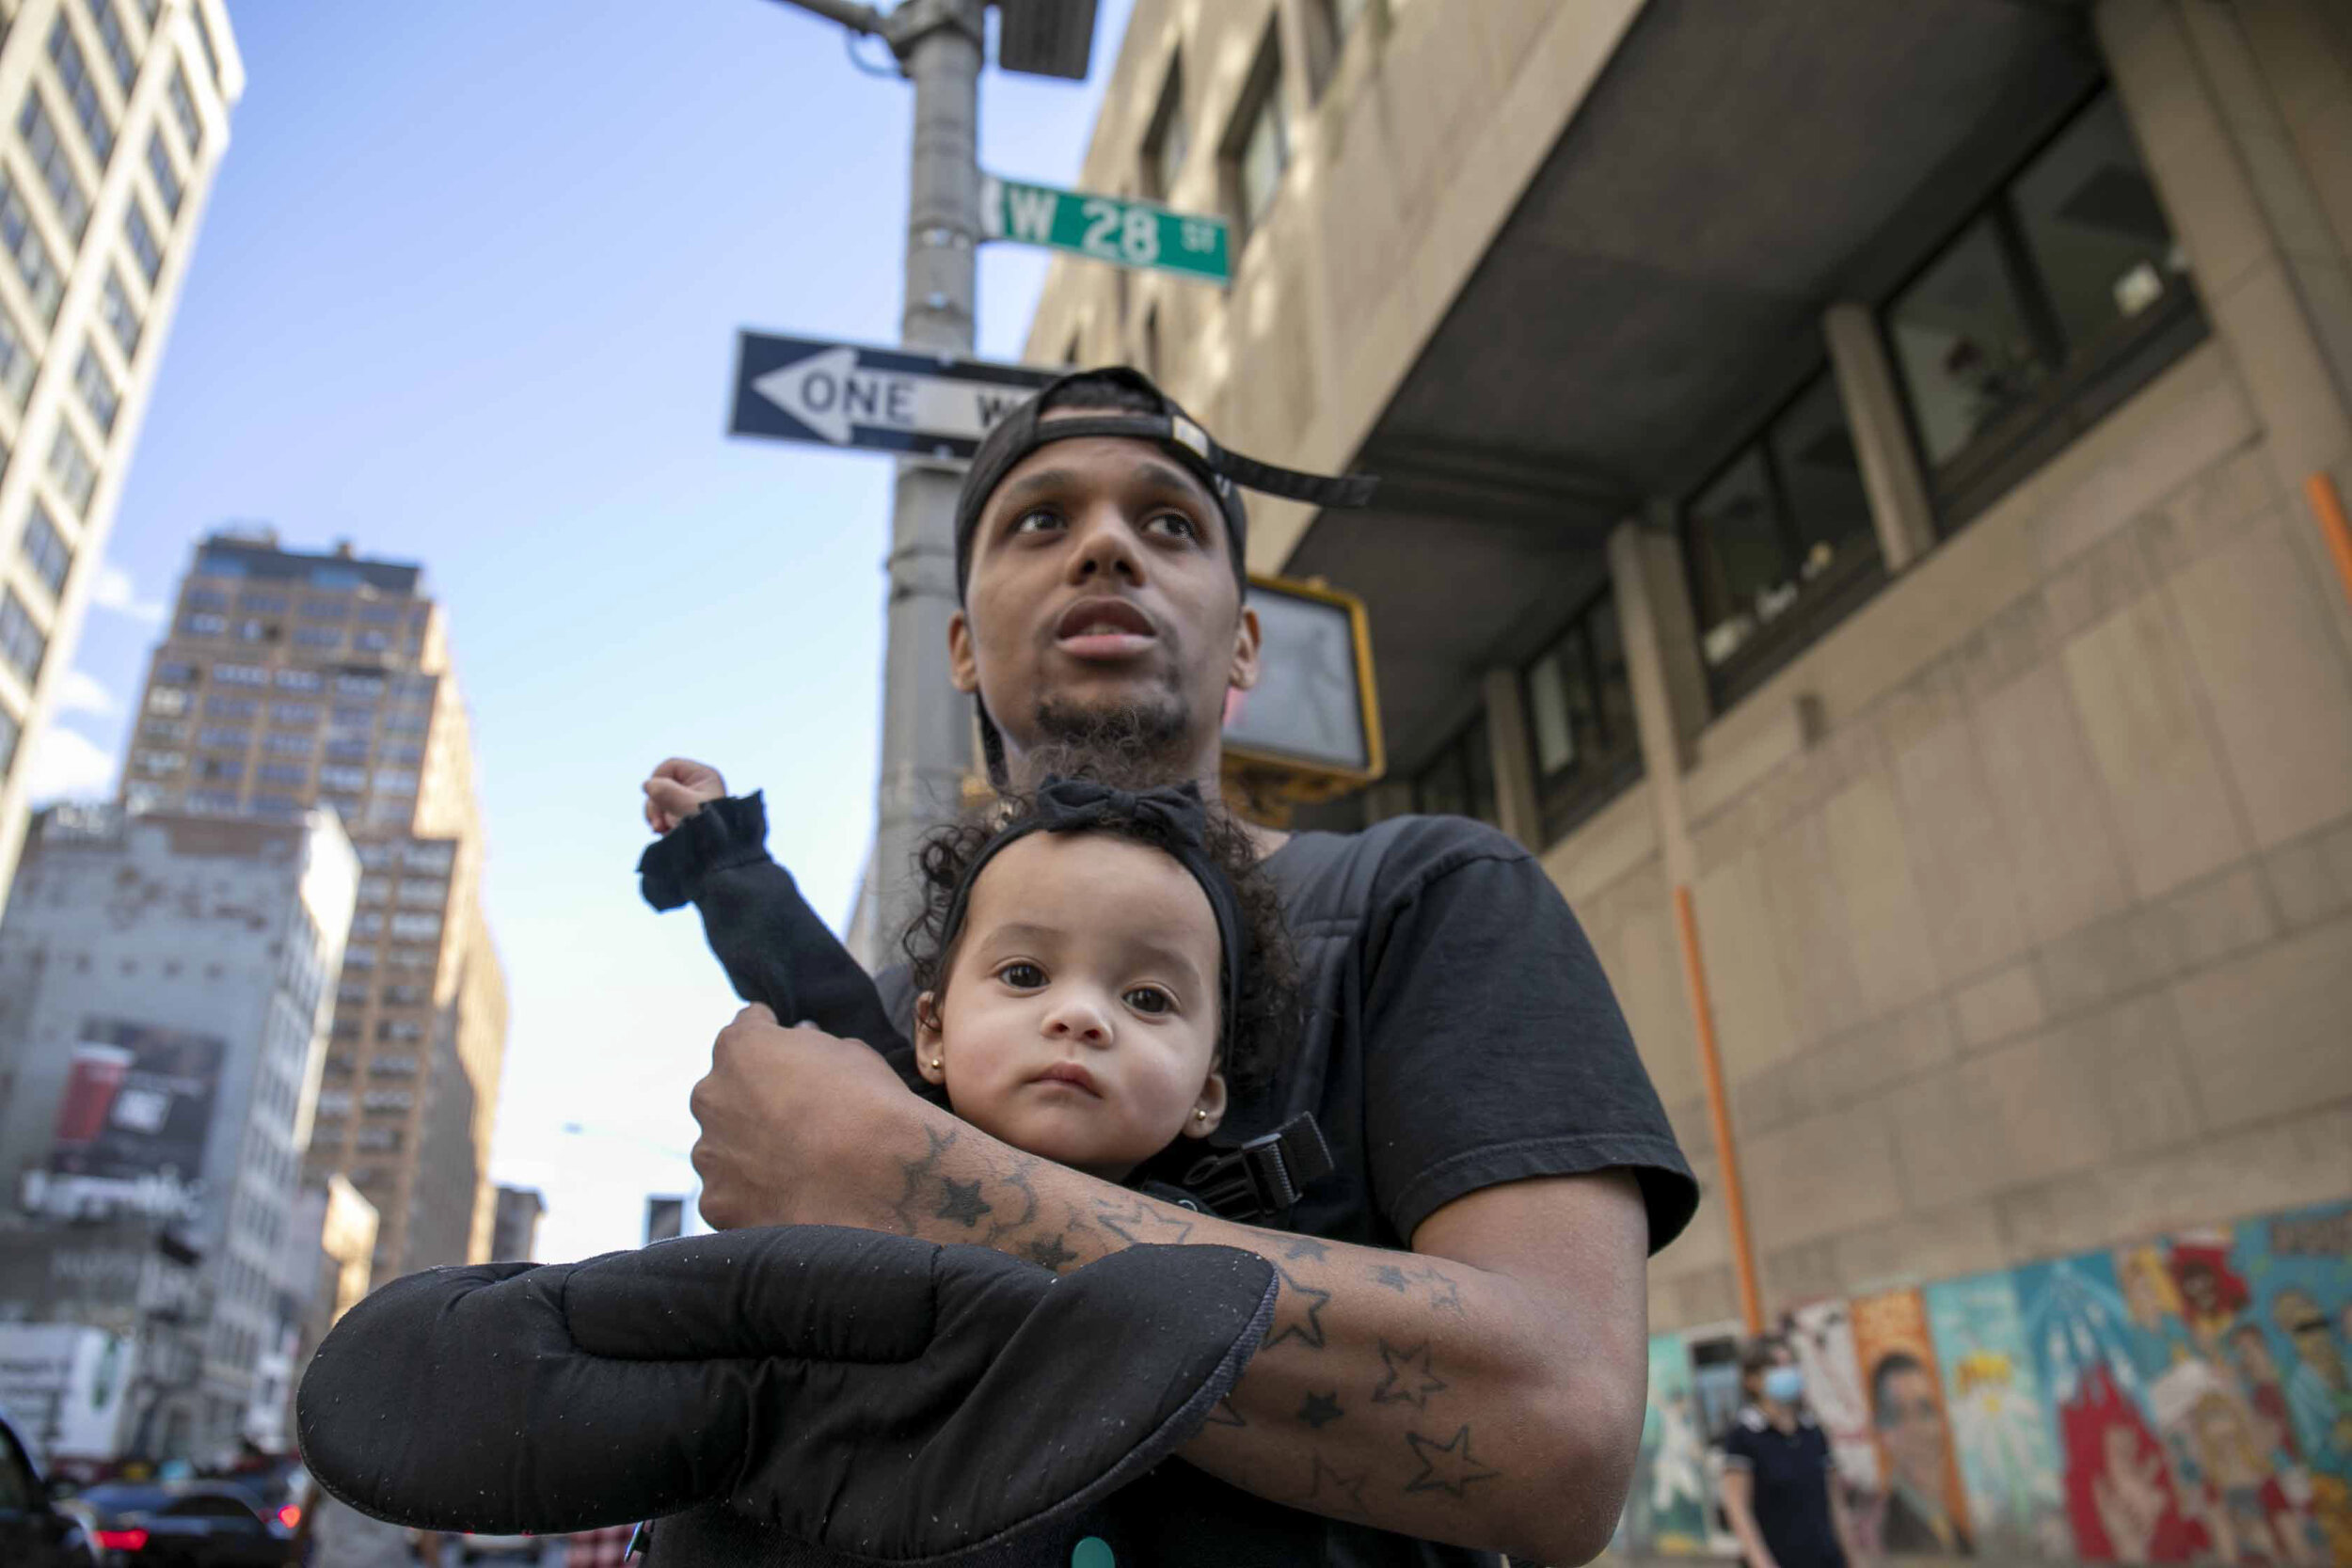  Photo By: Diana Cervantes  Joshua holds his 8-month-old daughter, Luna, as protestors march in Manhattan demanding justice for George Floyd who was killed by Minneapolis Police on May 25.  &nbsp;Joshua said he wasn’t trying to make Luna raise her fi